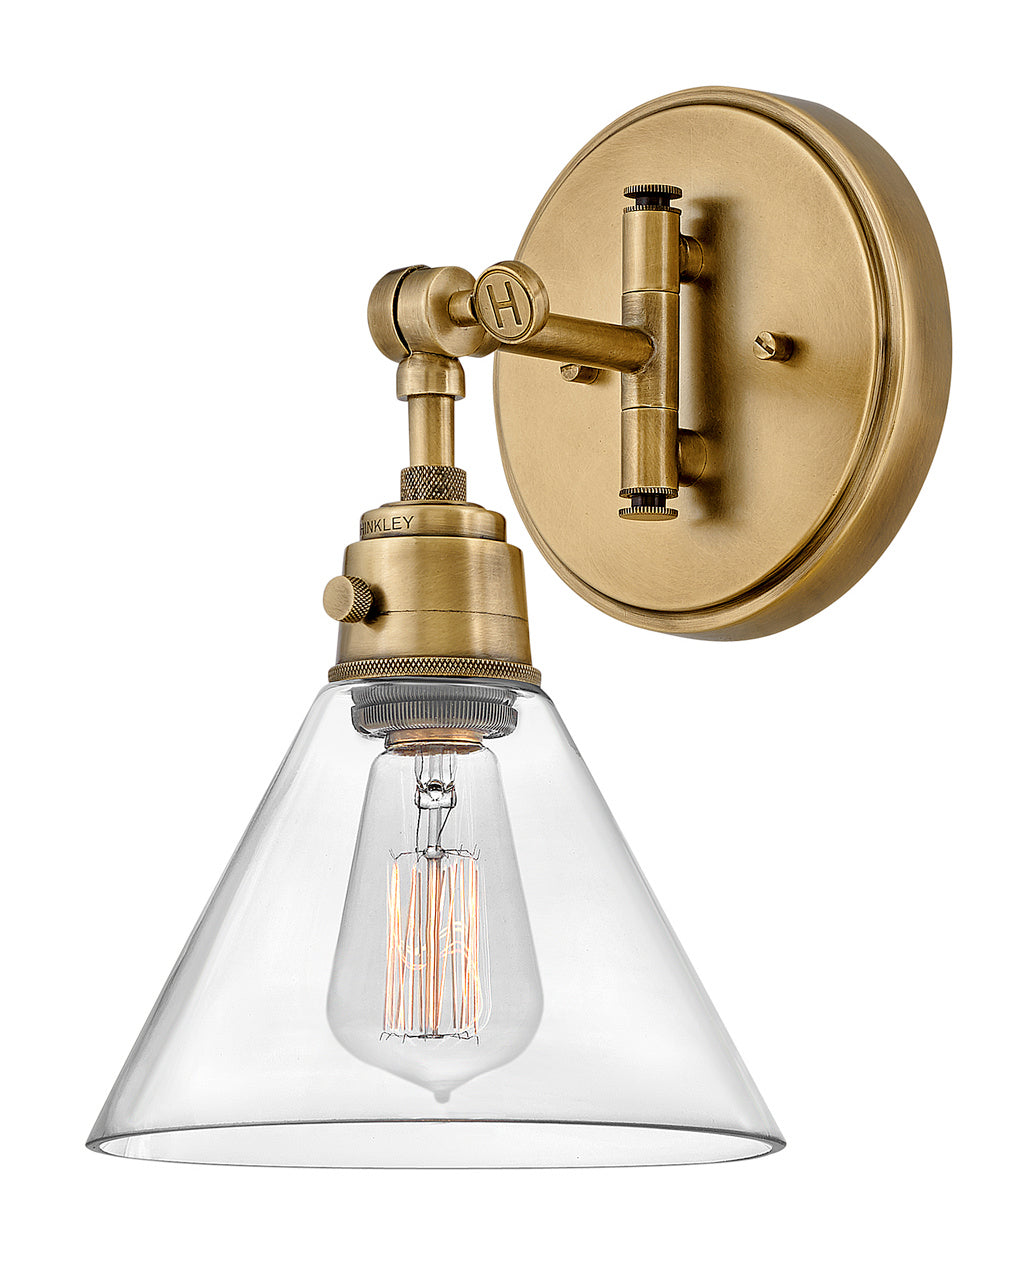 Hinkley Canada - LED Wall Sconce - Arti - Heritage Brass with Clear glass- Union Lighting Luminaires Decor